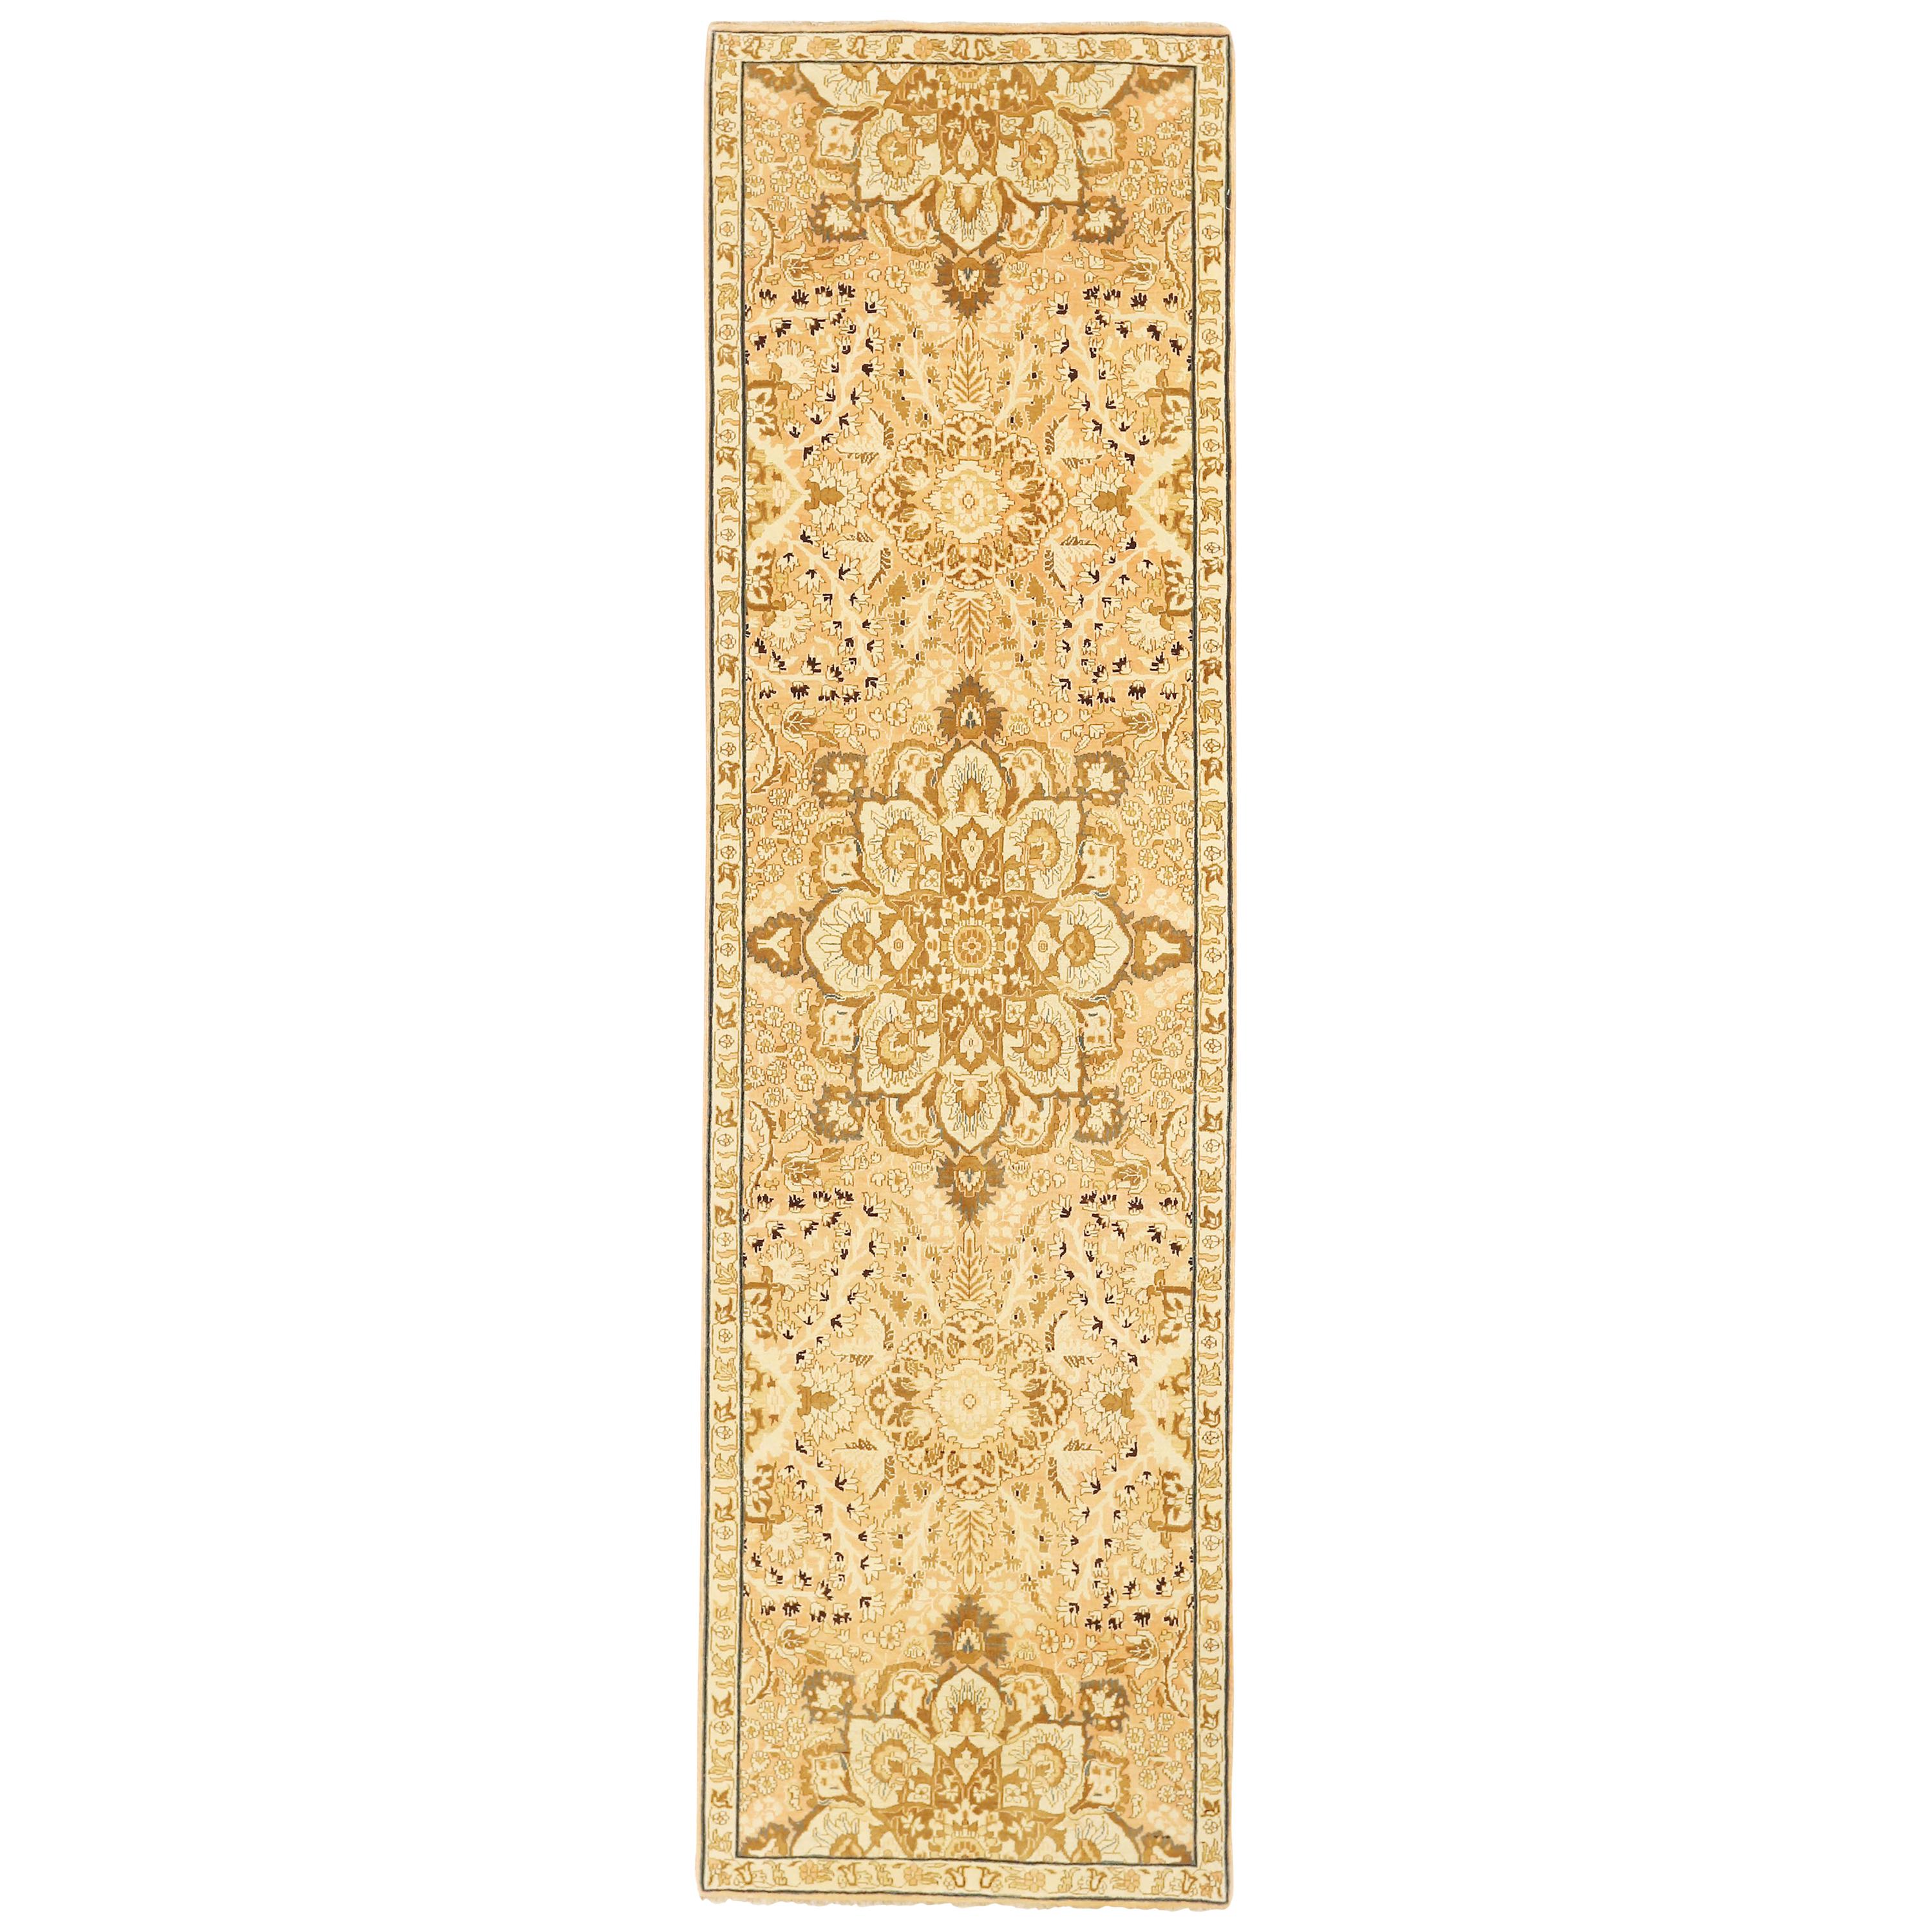 Contemporary Persian Tabriz Runner Rug with Brown and Ivory Floral Motifs